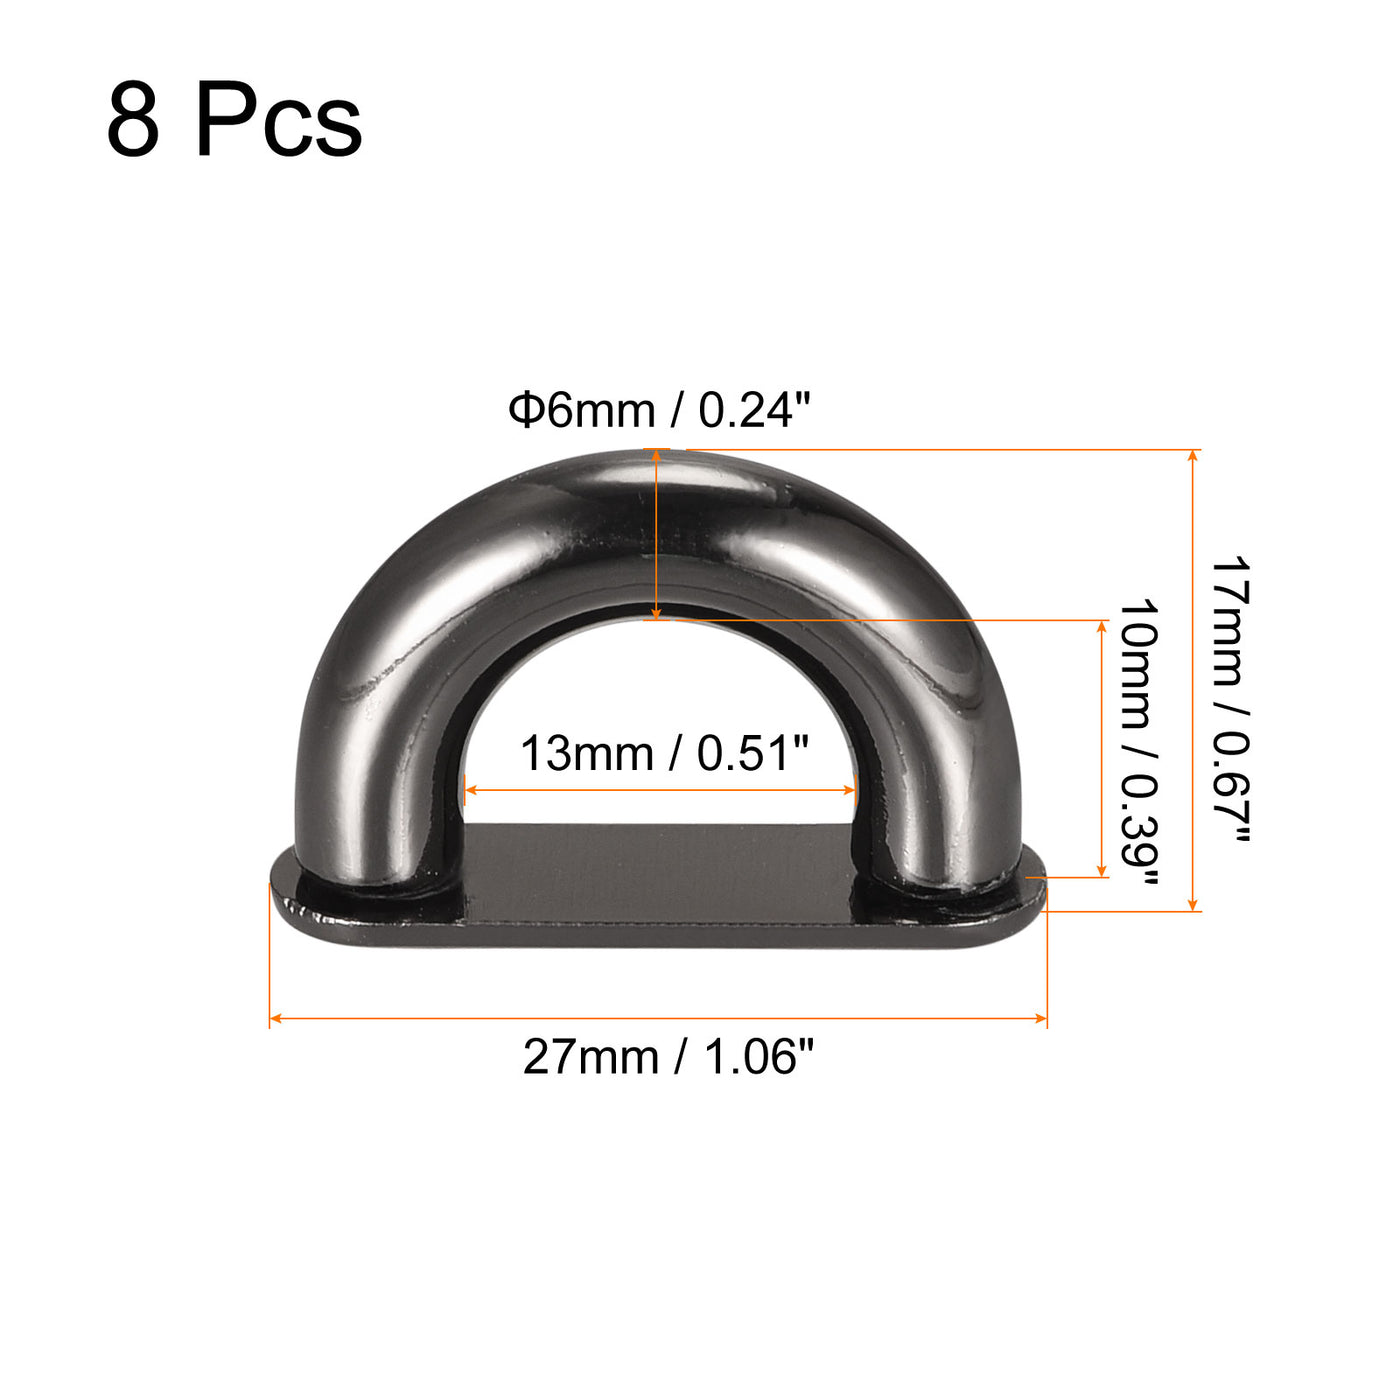 Uxcell Uxcell Arch Bridge Buckle, 8Pcs 27mm D-Ring Connector Buckles for Bag Hanger DIY, Black